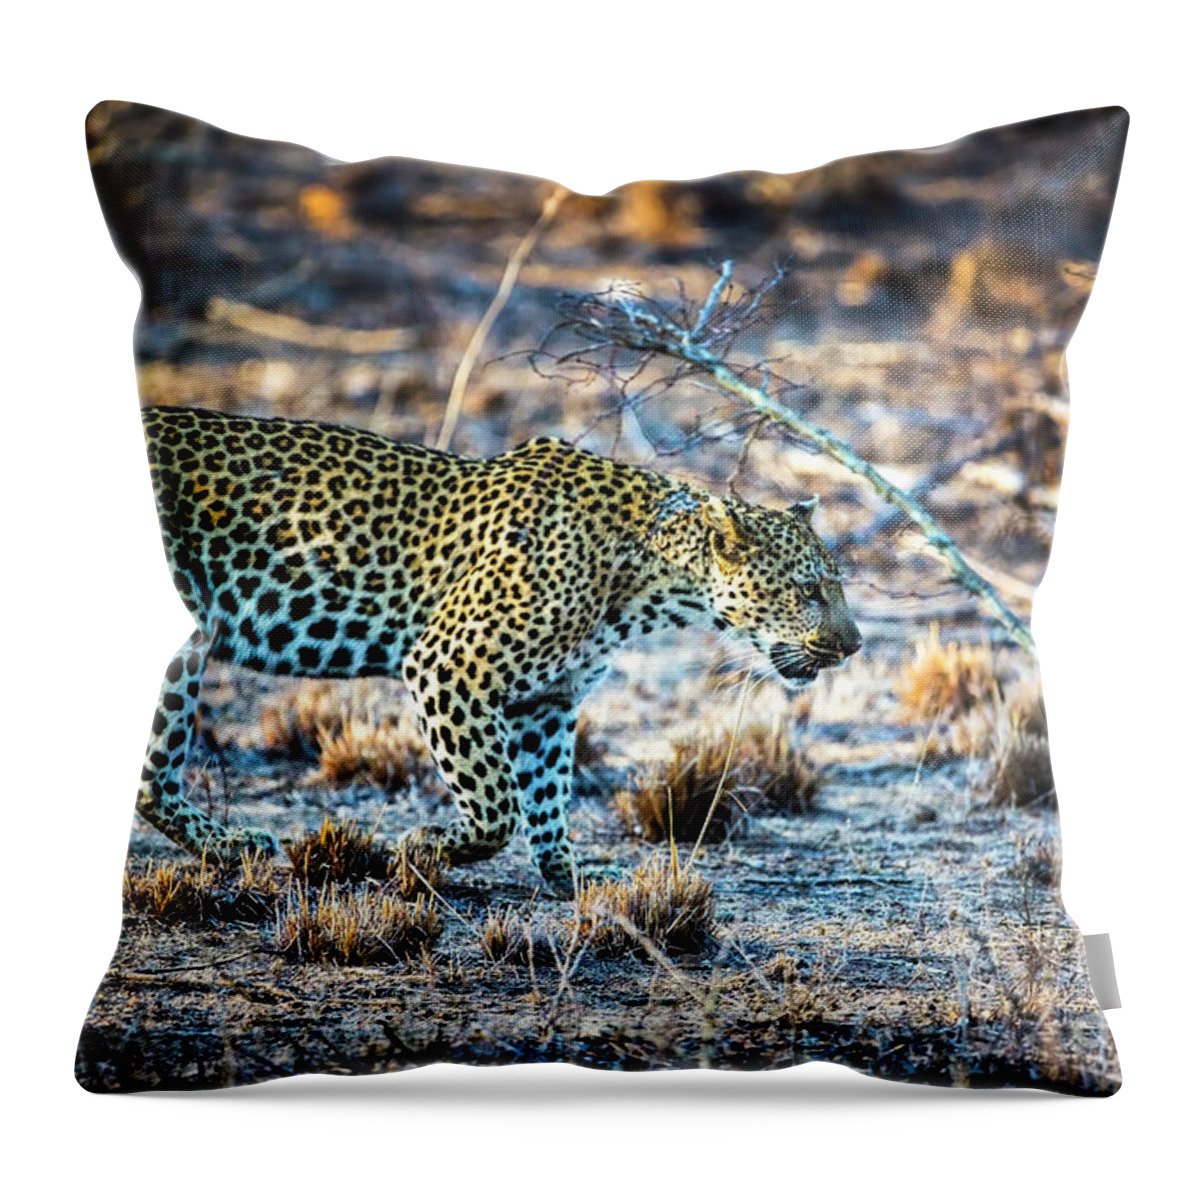 Leopard On The Prowl Throw Pillow featuring the photograph Leopard on the prowl by Daryl L Hunter